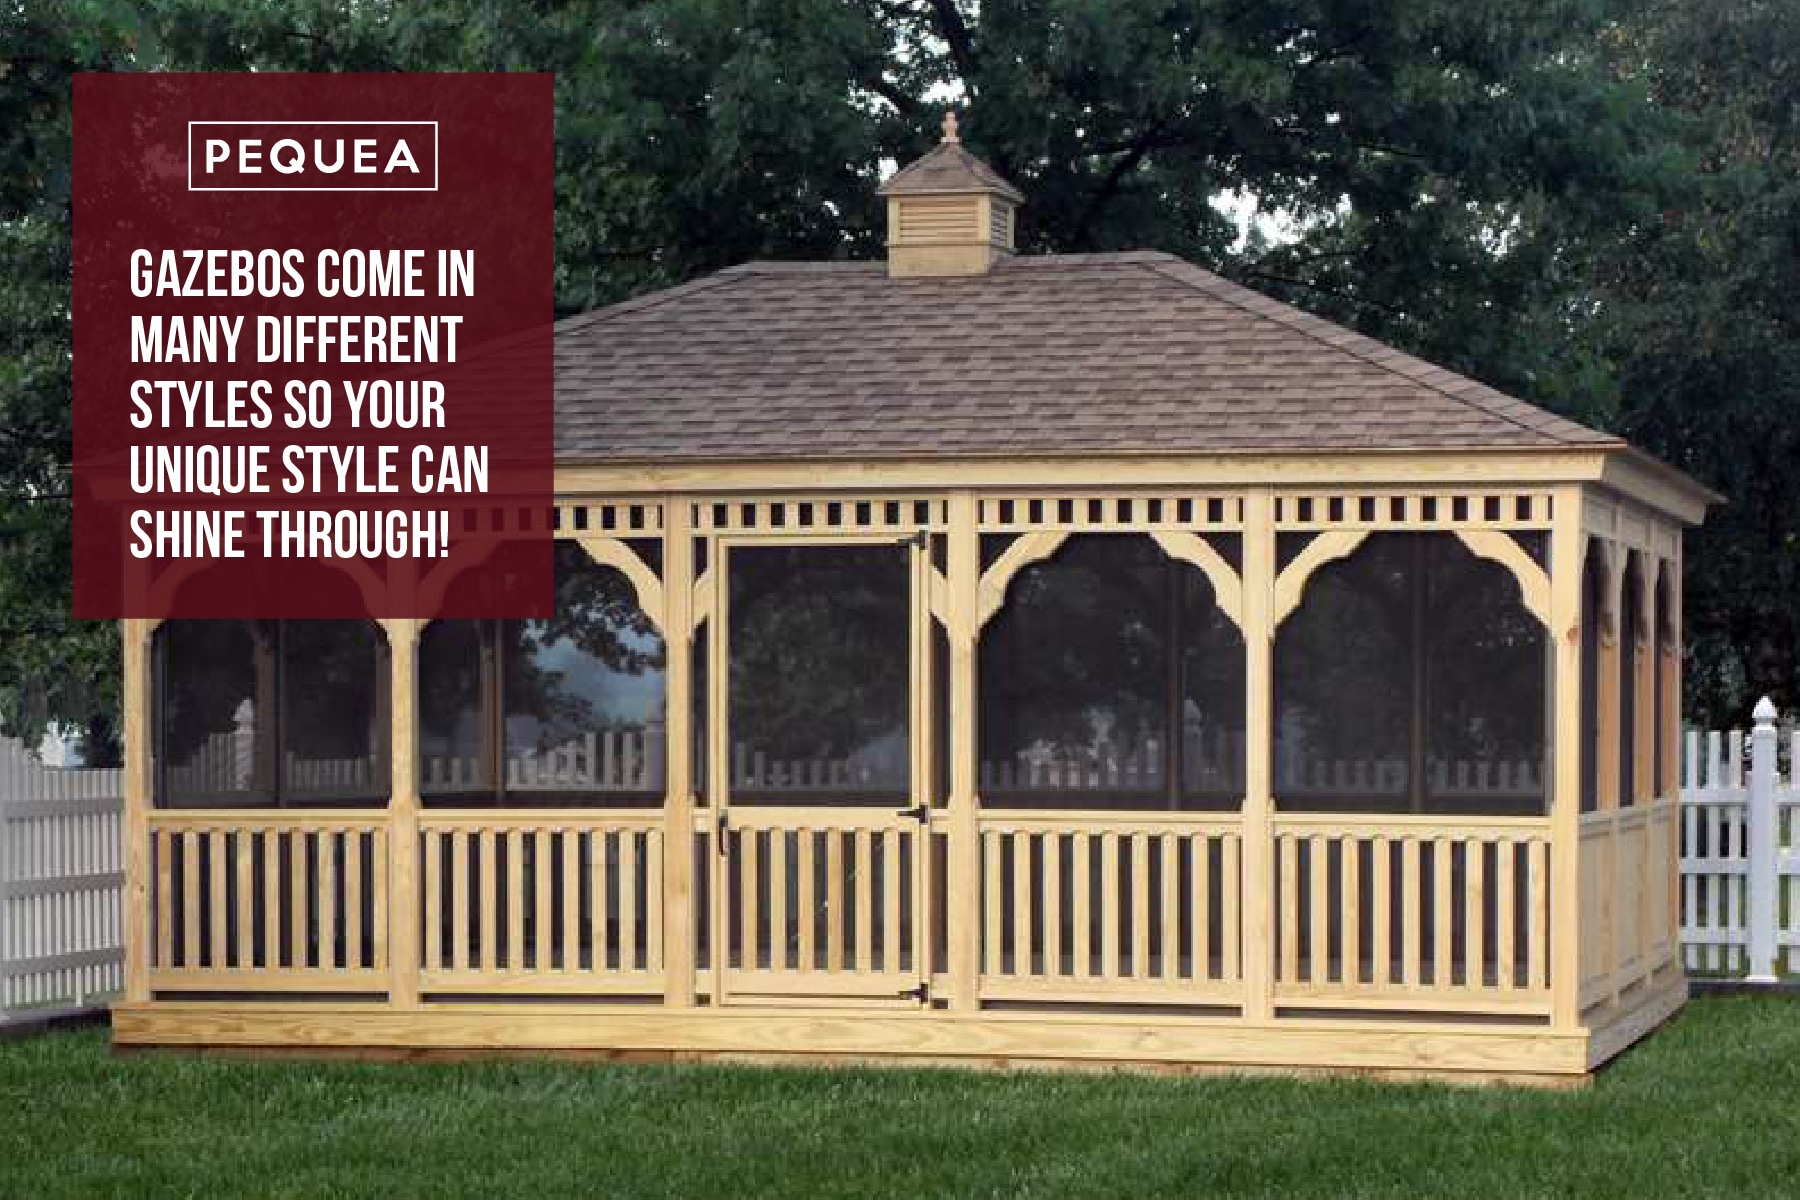 gazebos come in many different designs and styles